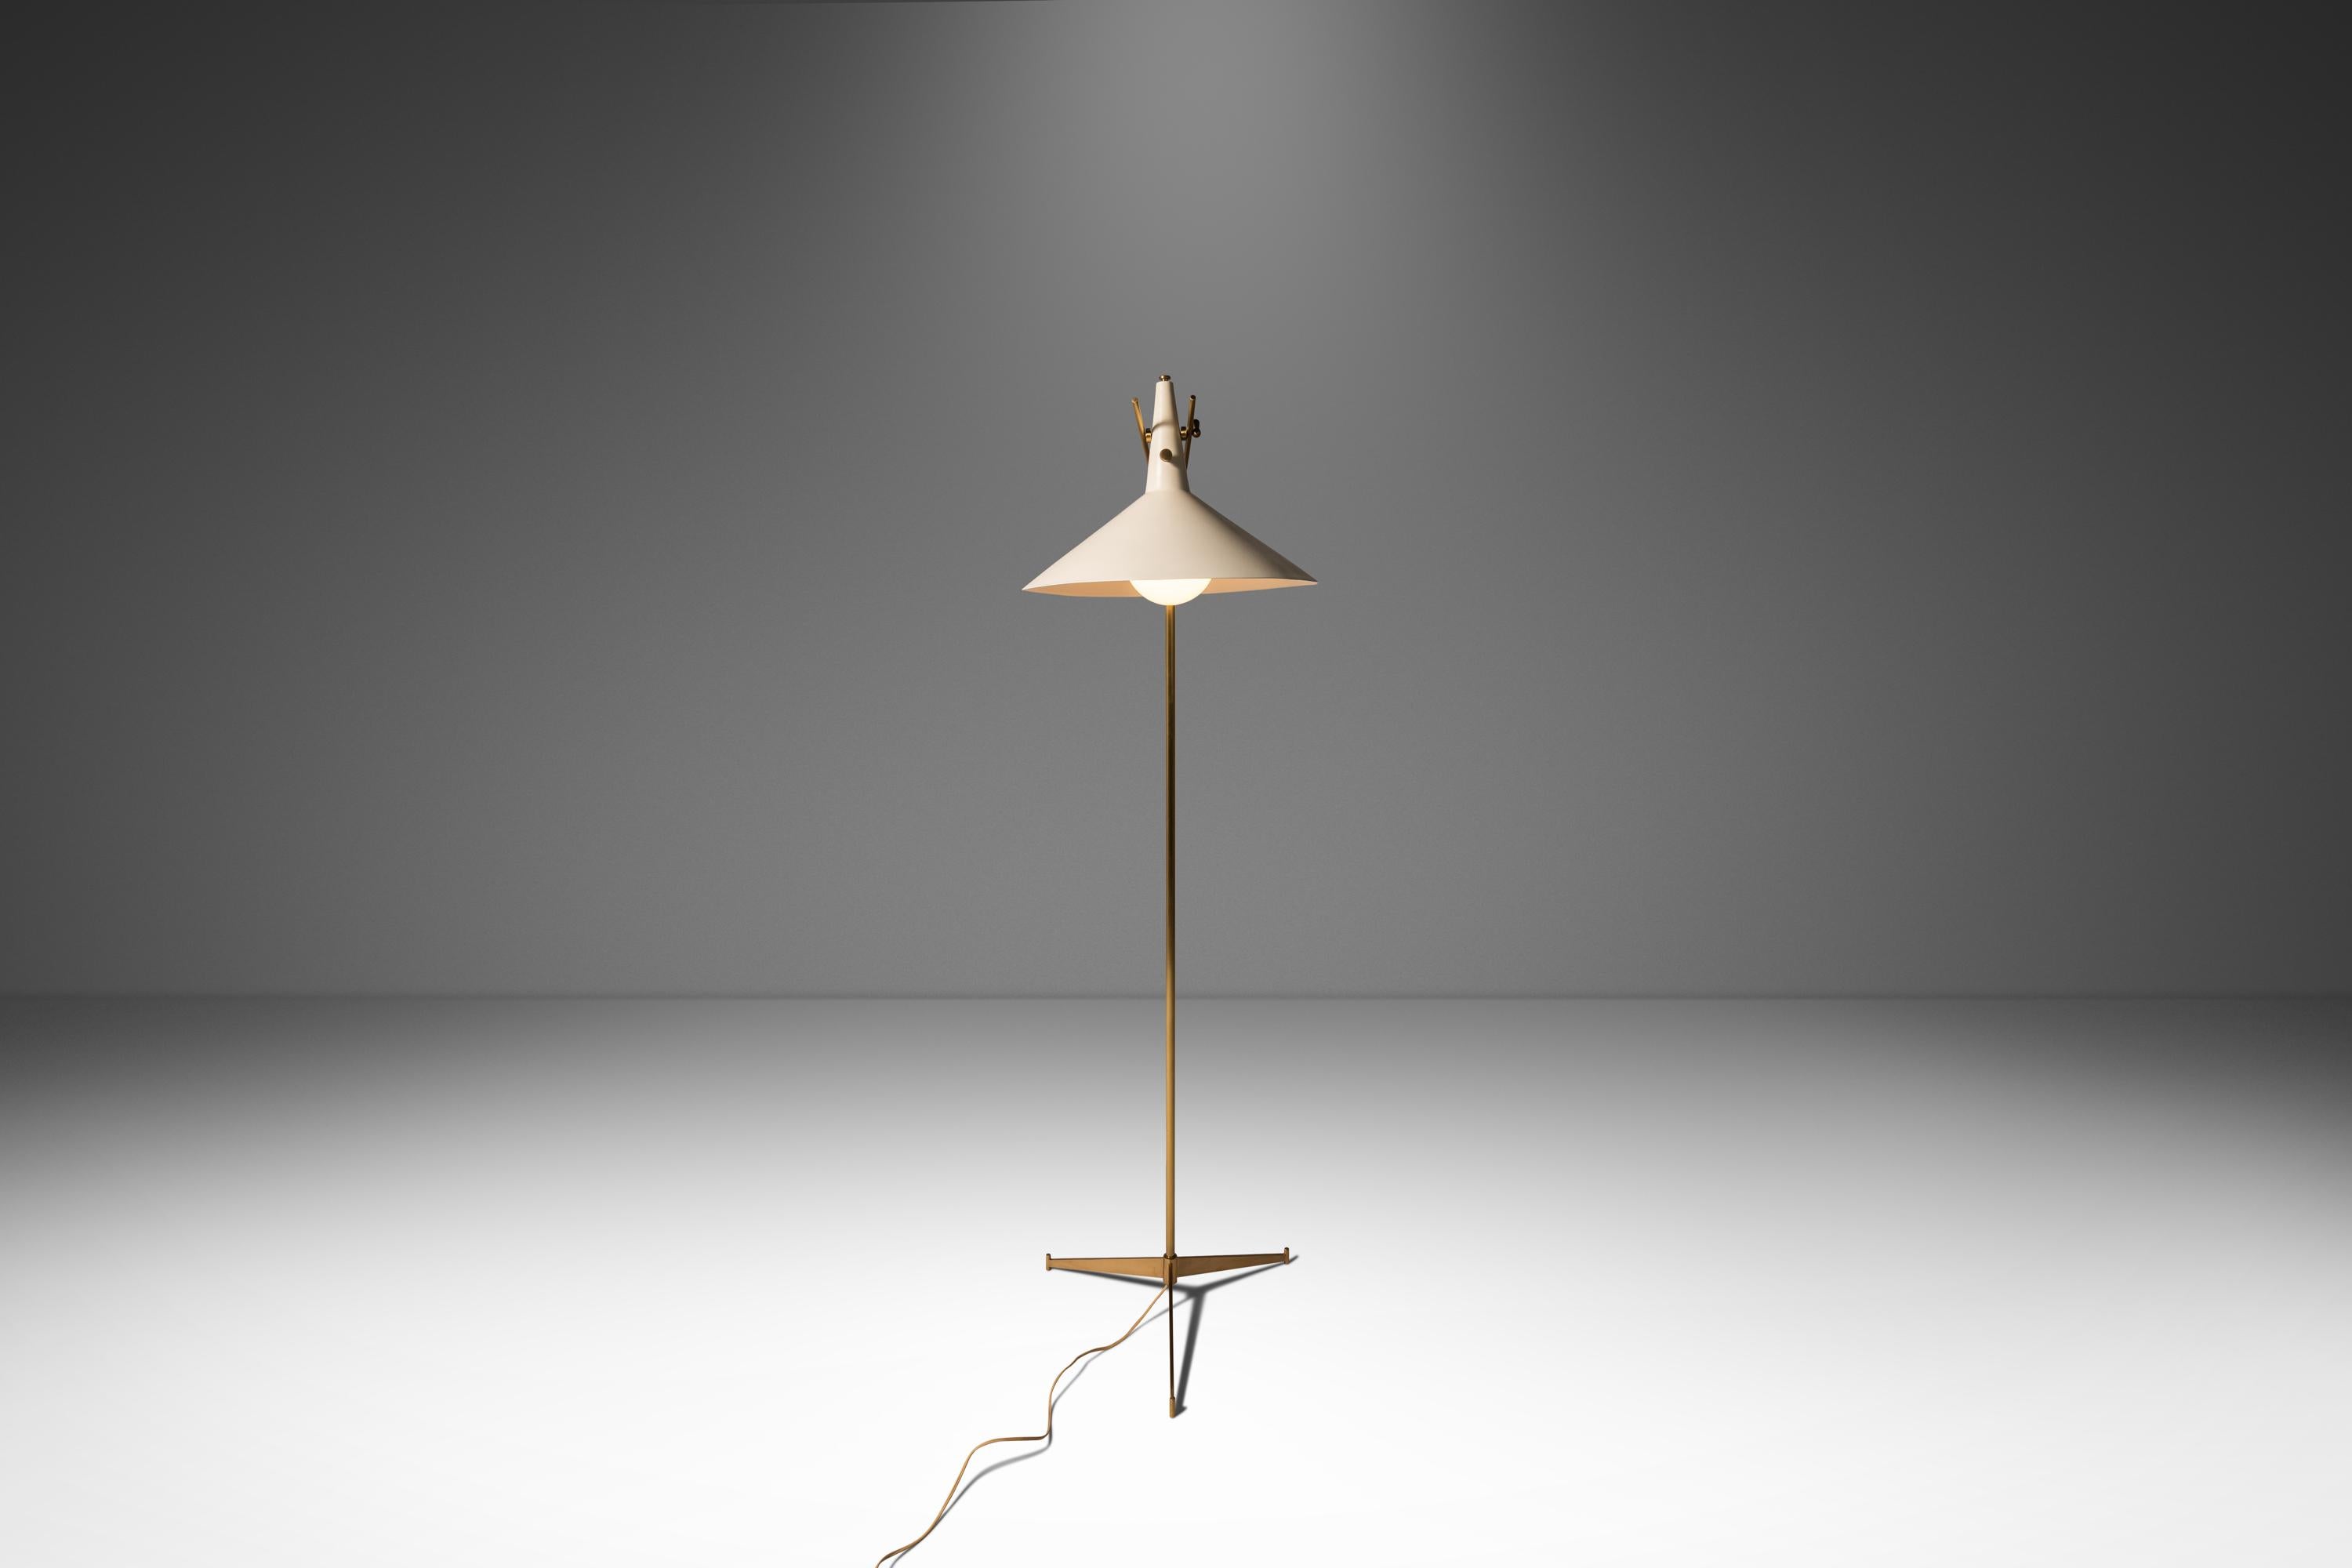 American Mid-Century Model E-11 Floor Lamp by Paul McCobb for Directional, USA, c. 1950's For Sale